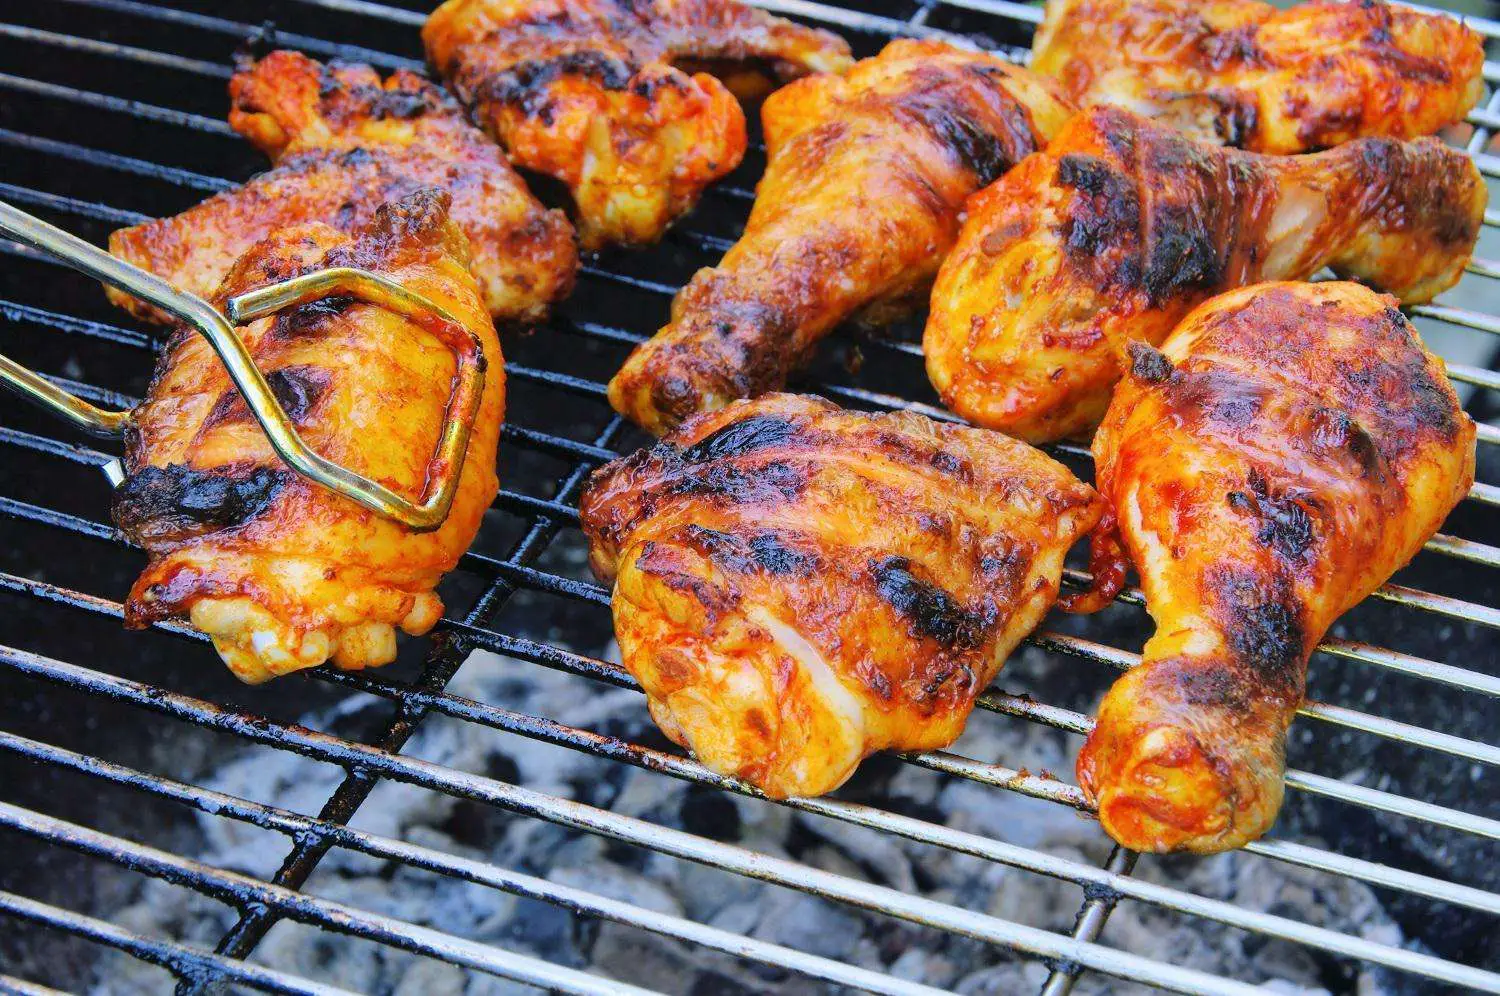 How long to cook every piece of chicken on the grill